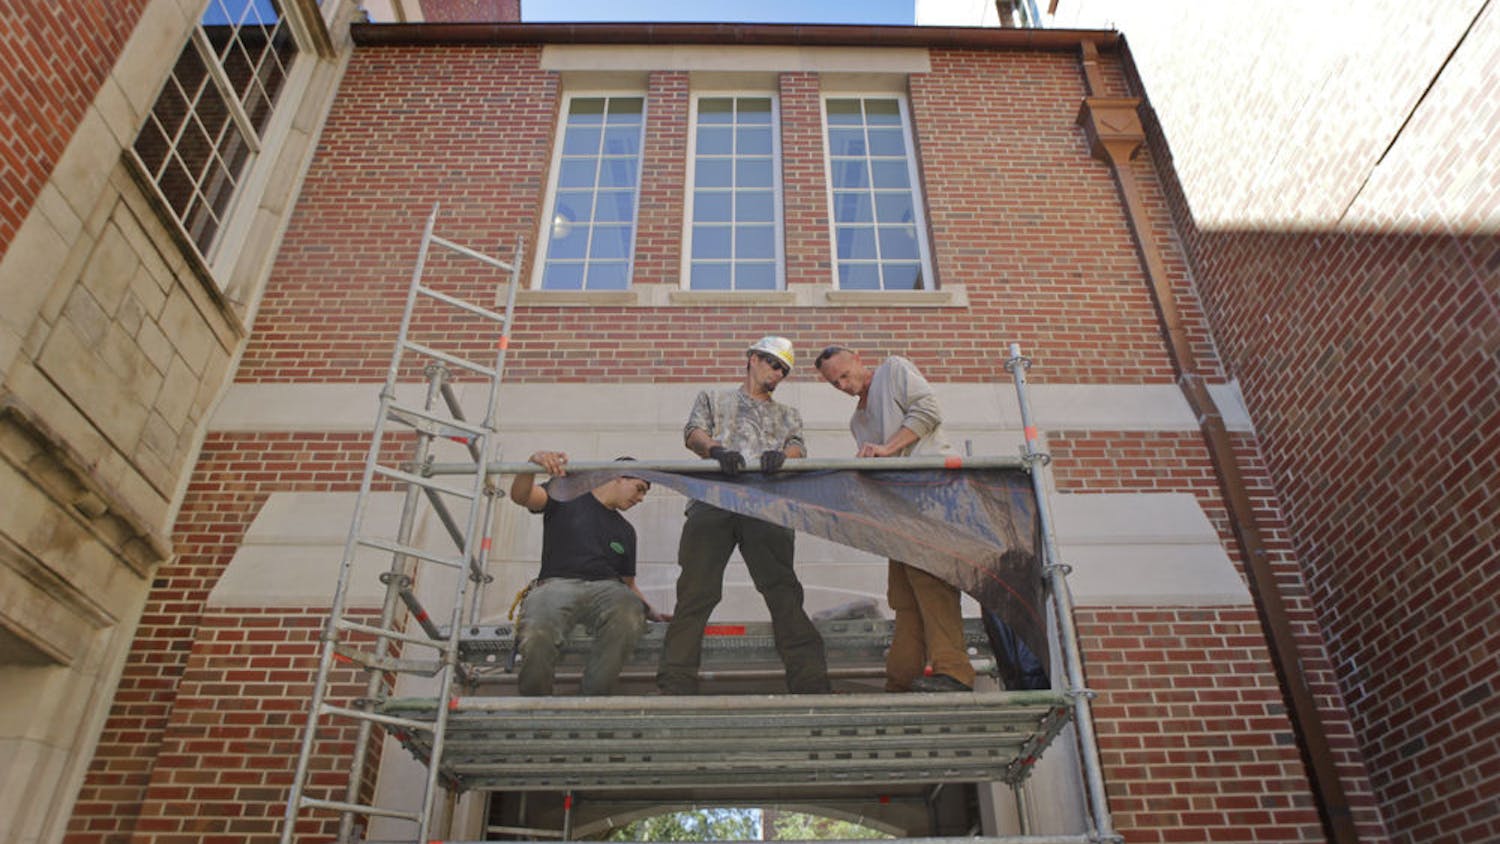 From left: Custom Quality Scaffold builders Bryson Swails, Dan Yunk and Chuck Griffith set up to work on the double archway at Heavener Hall. Three secular quotations will be added to the archway to supplement the Bible verse already inscribed on it.